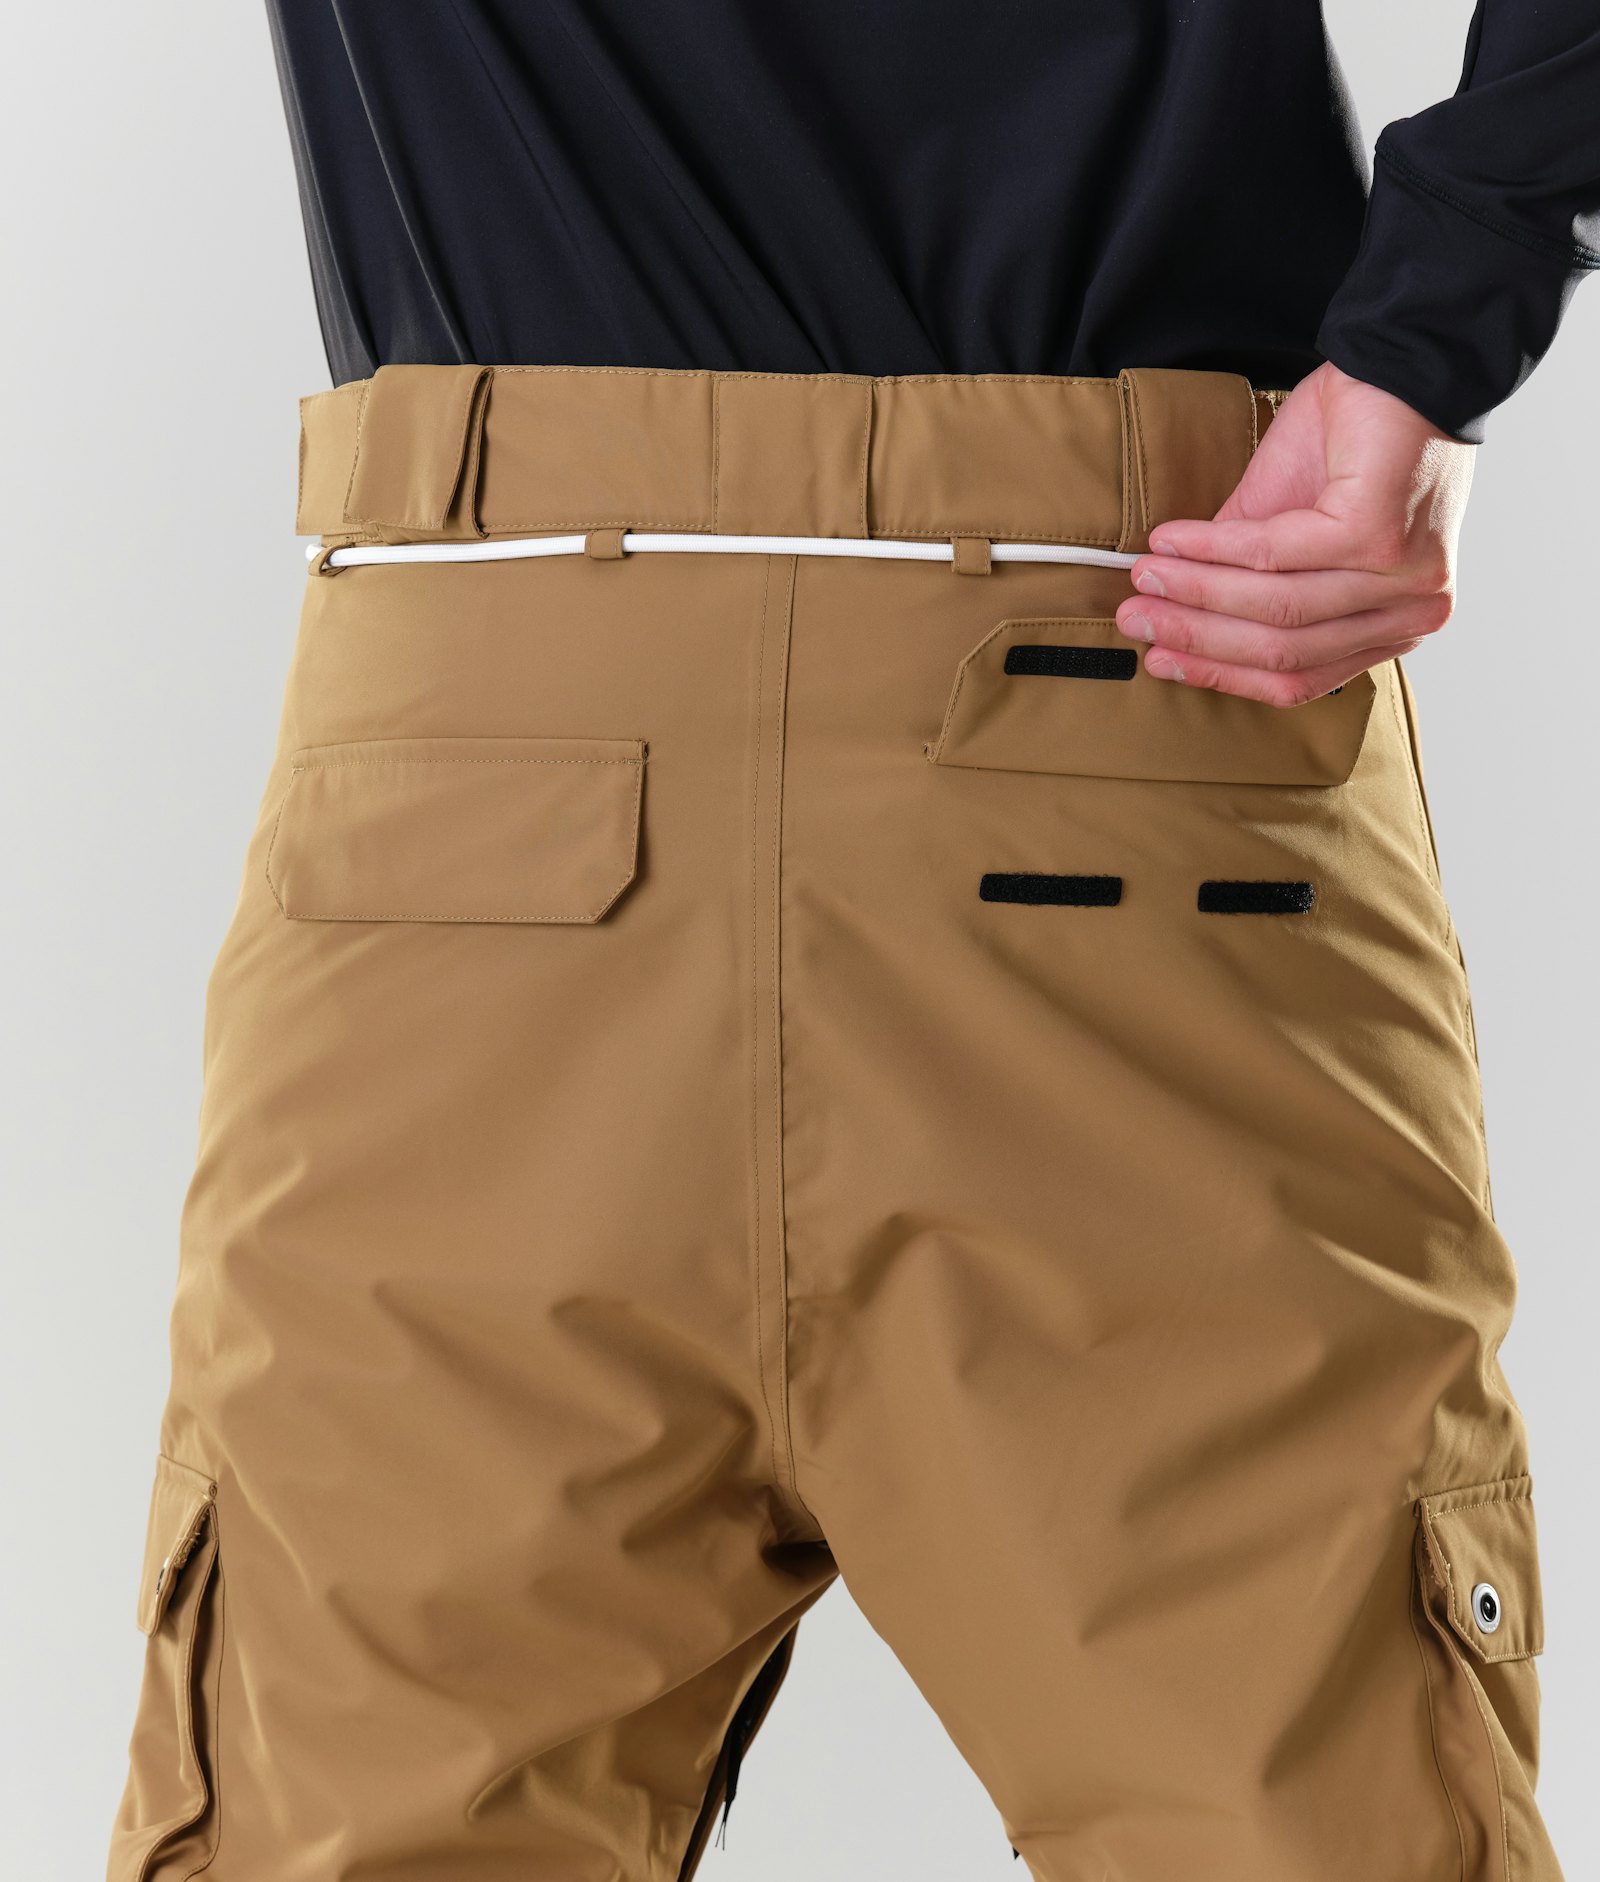 Dope Iconic 2020 Snowboard Pants Men Gold